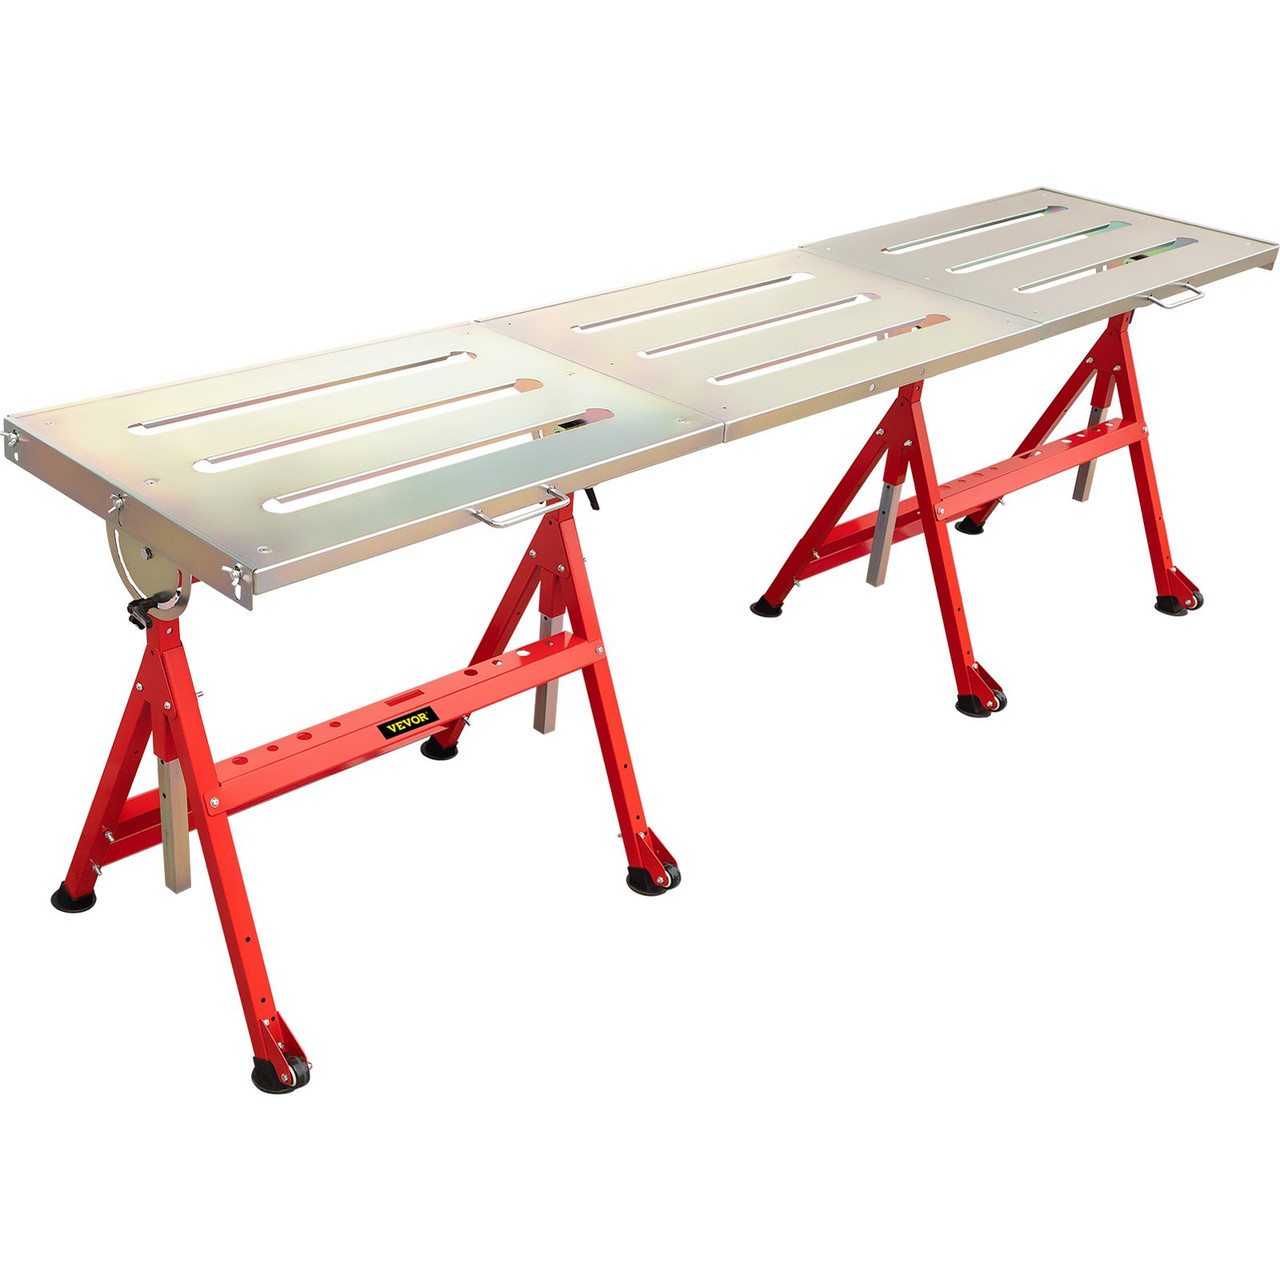 Welding Table 90'' x 20'' Steel Welding Table Nine 1.1 in. / 28mm Slots Welding Bench Table Adjustable Angle & Height Portable Table, Casters, Retractable Guide Rails, Eccentric Leveling Foot